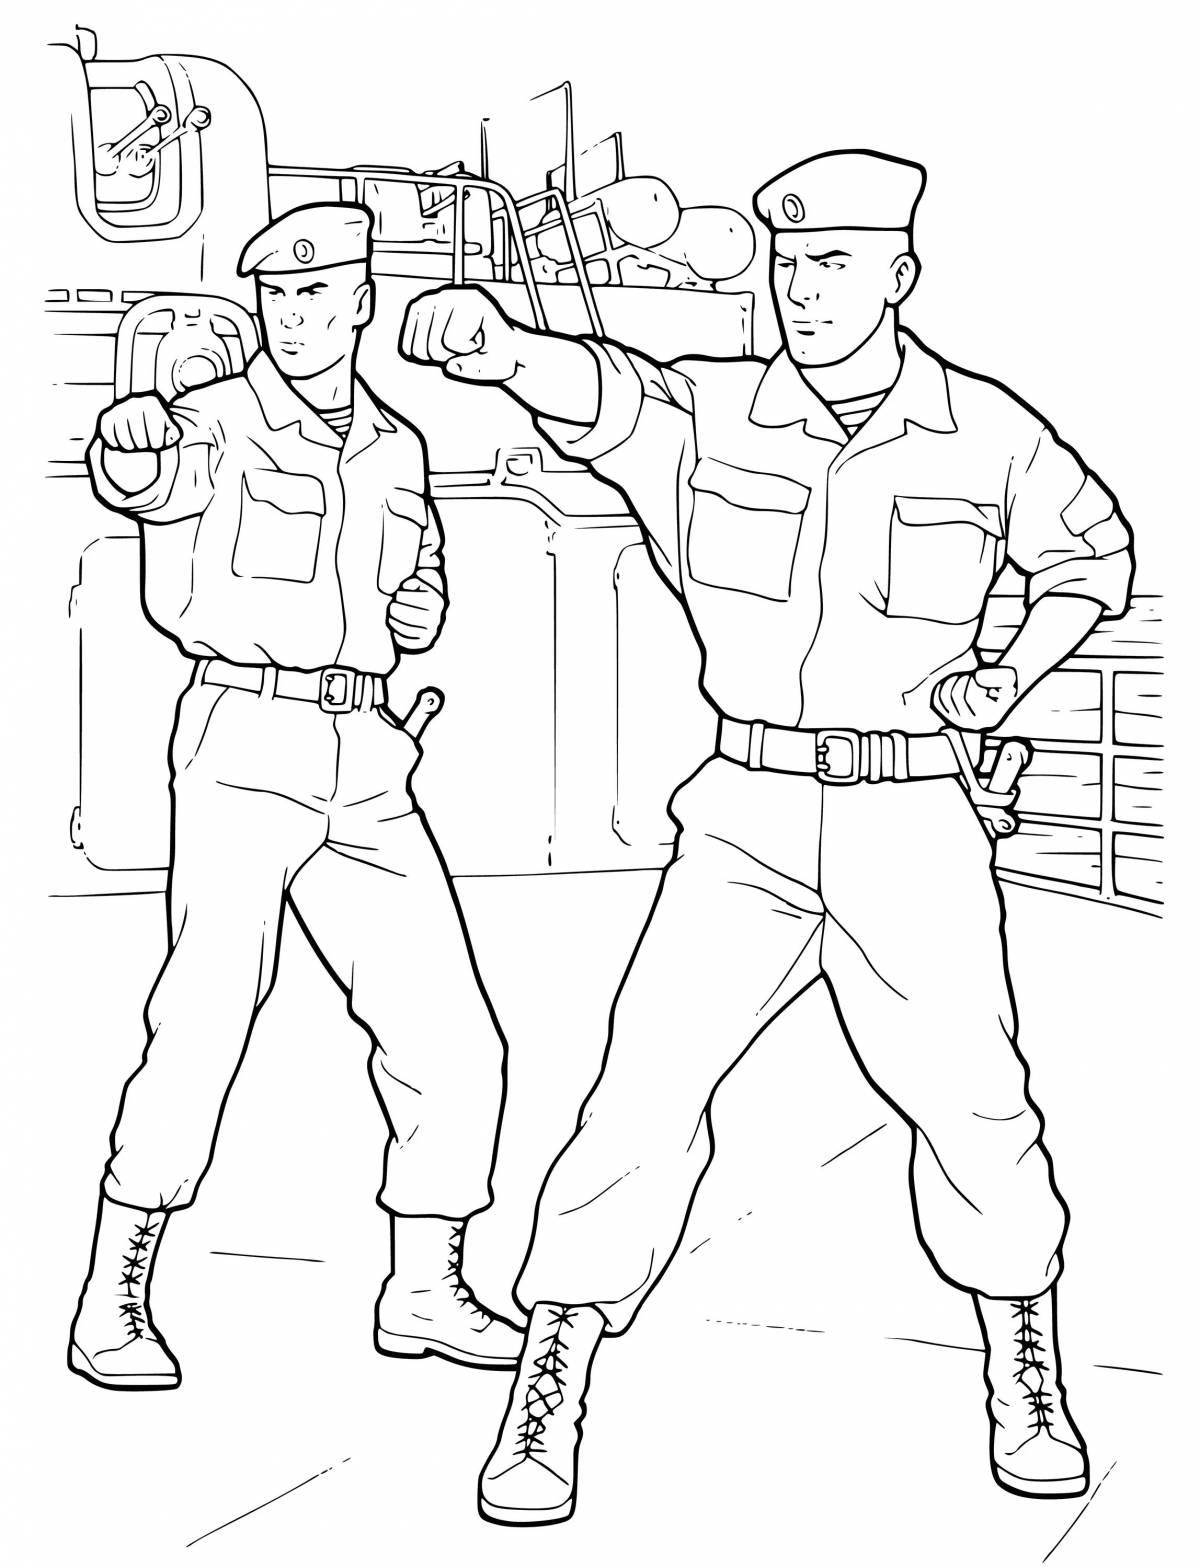 Live infantry coloring for minors